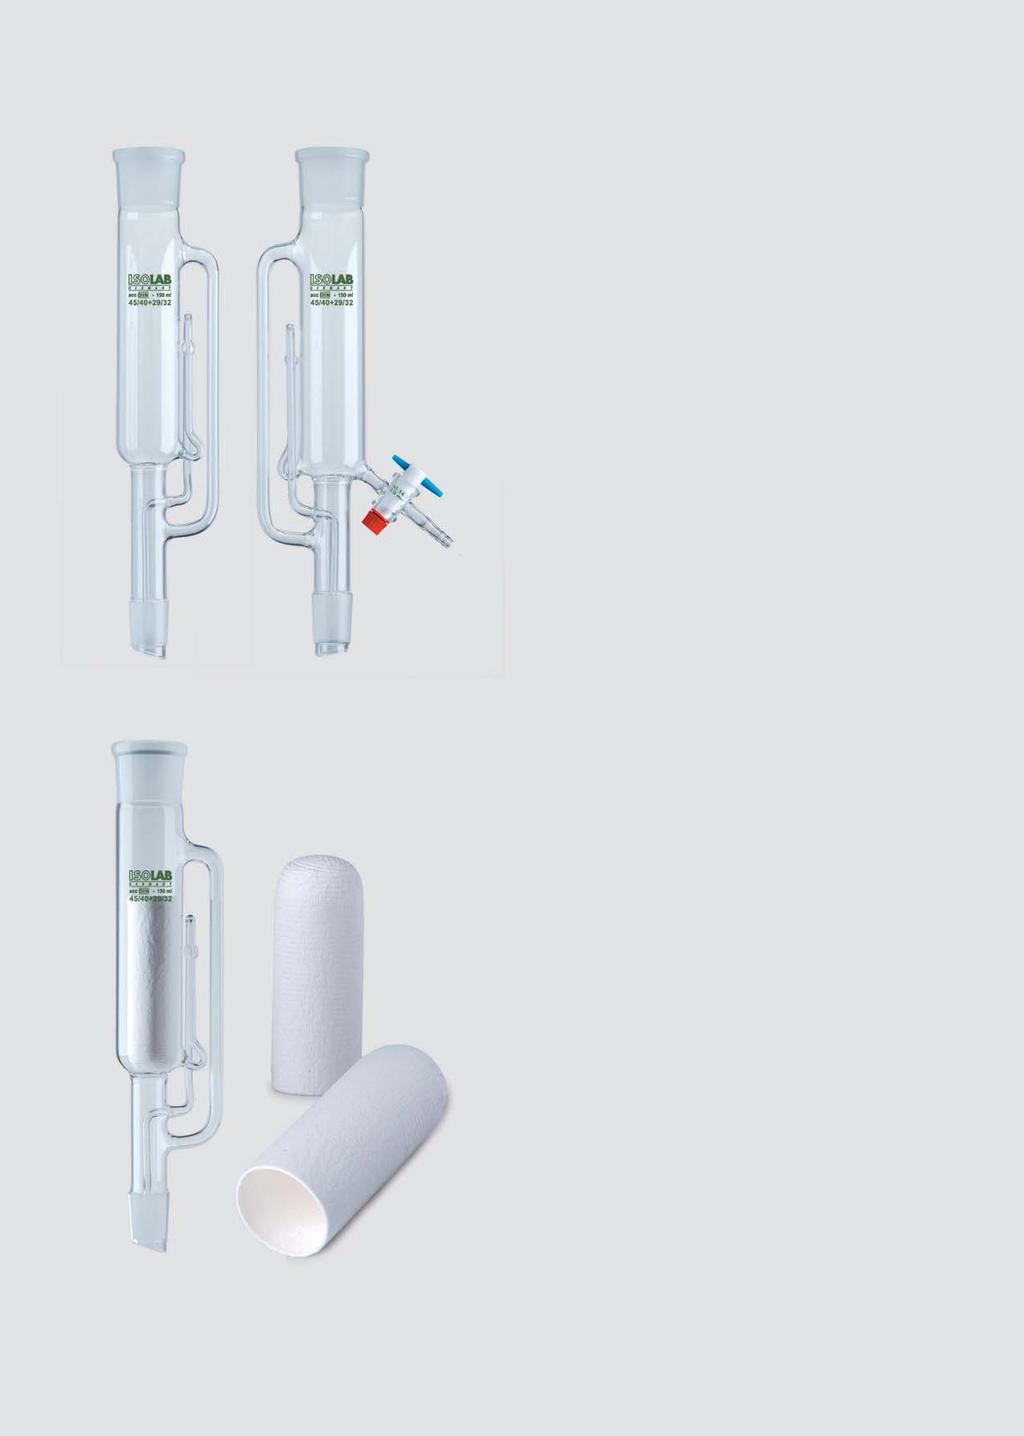 analytical laboratory soxhlet extractors with and W/O stopcock DIN 12602. Either supplied with PTFE stopcock or without any stopcocks. The side arms accept tubings with 8/9 mm bore size.